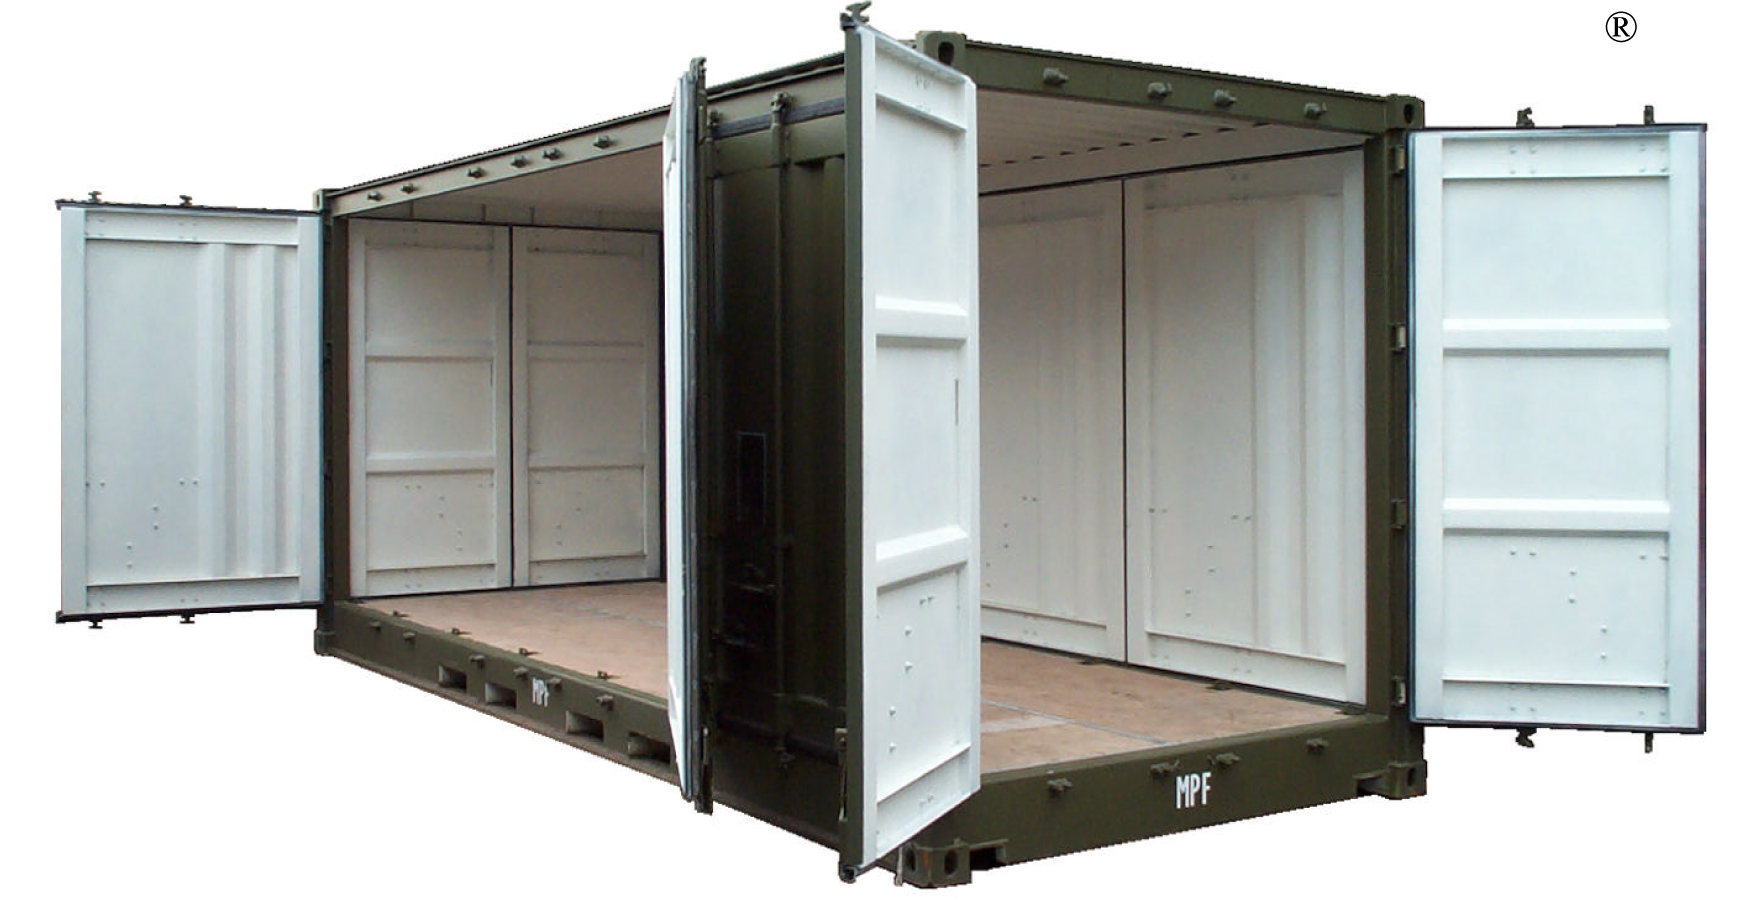 20’ X 8’ 6” Standard Dry Freight Container, All Access Full Opening, No Tween Deck